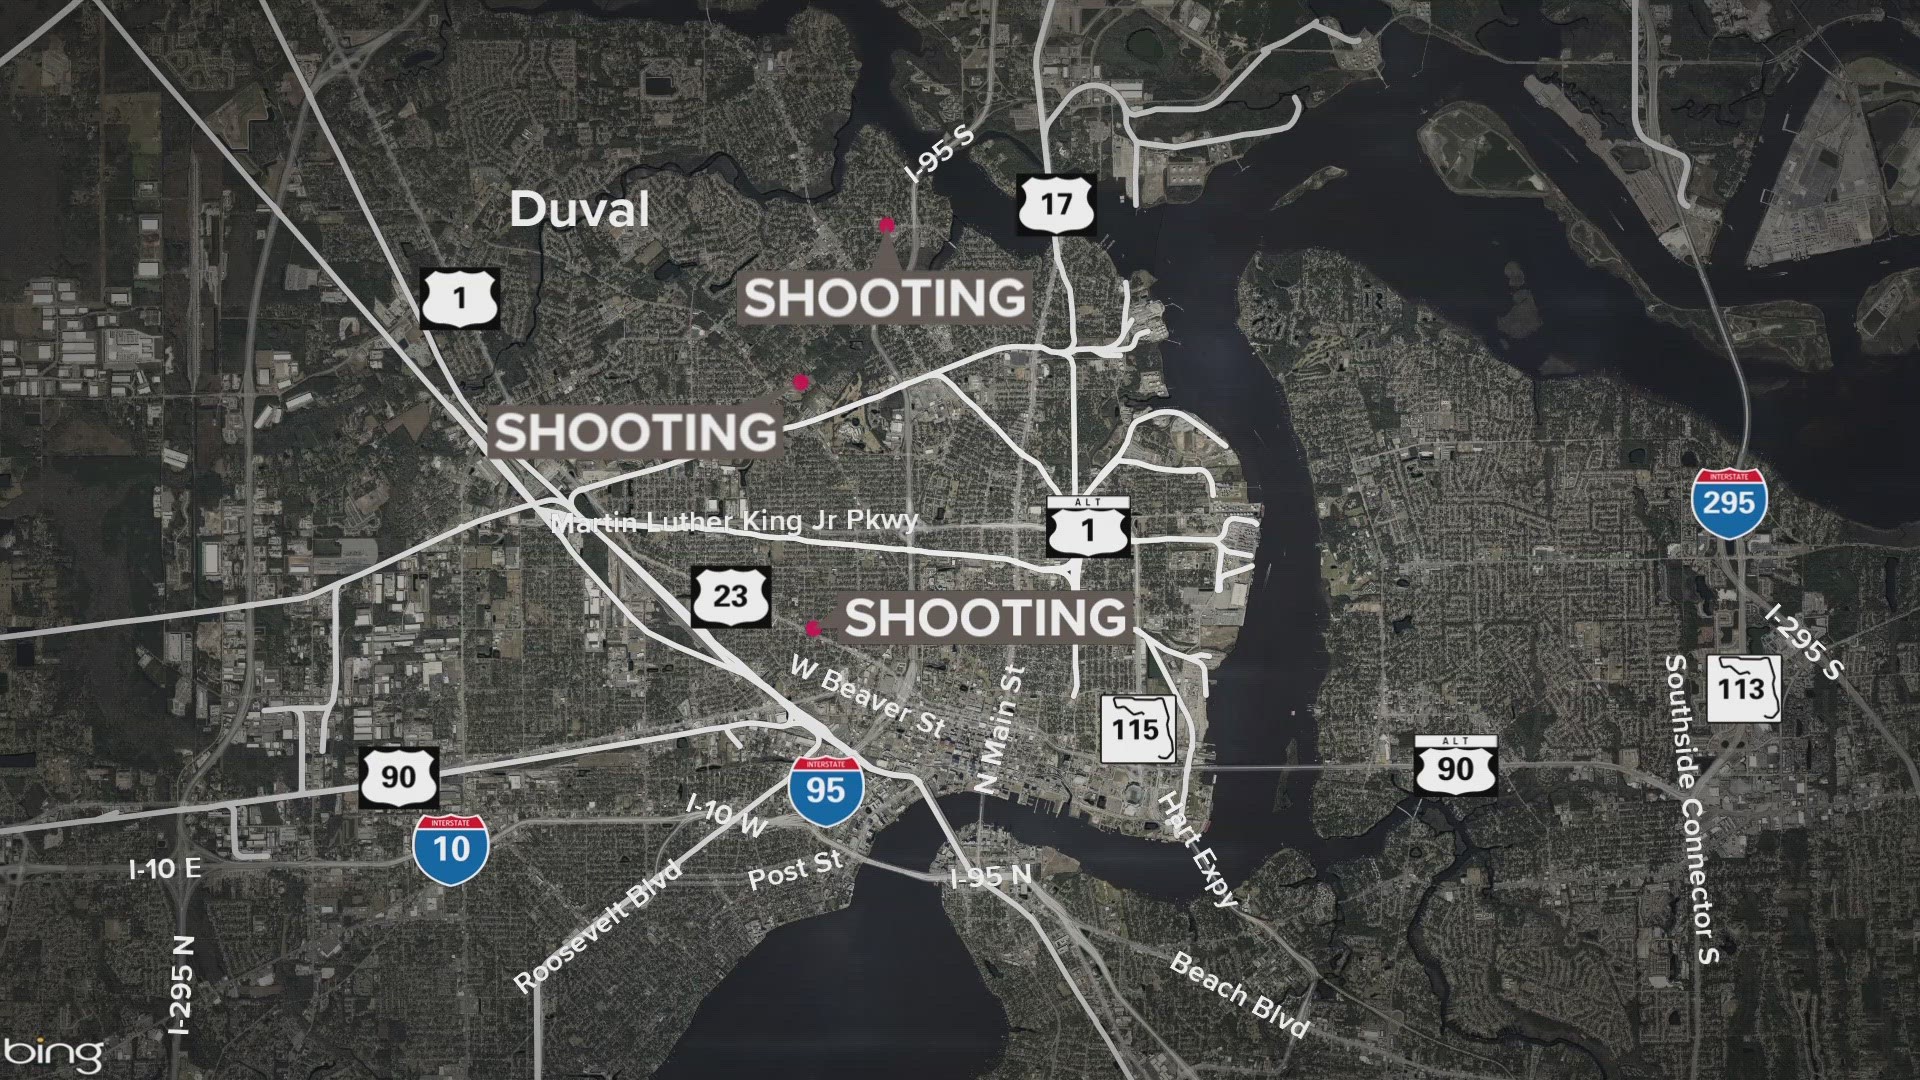 One person was detained in one of the three shootings, according to the Jacksonville Sheriff's Office.